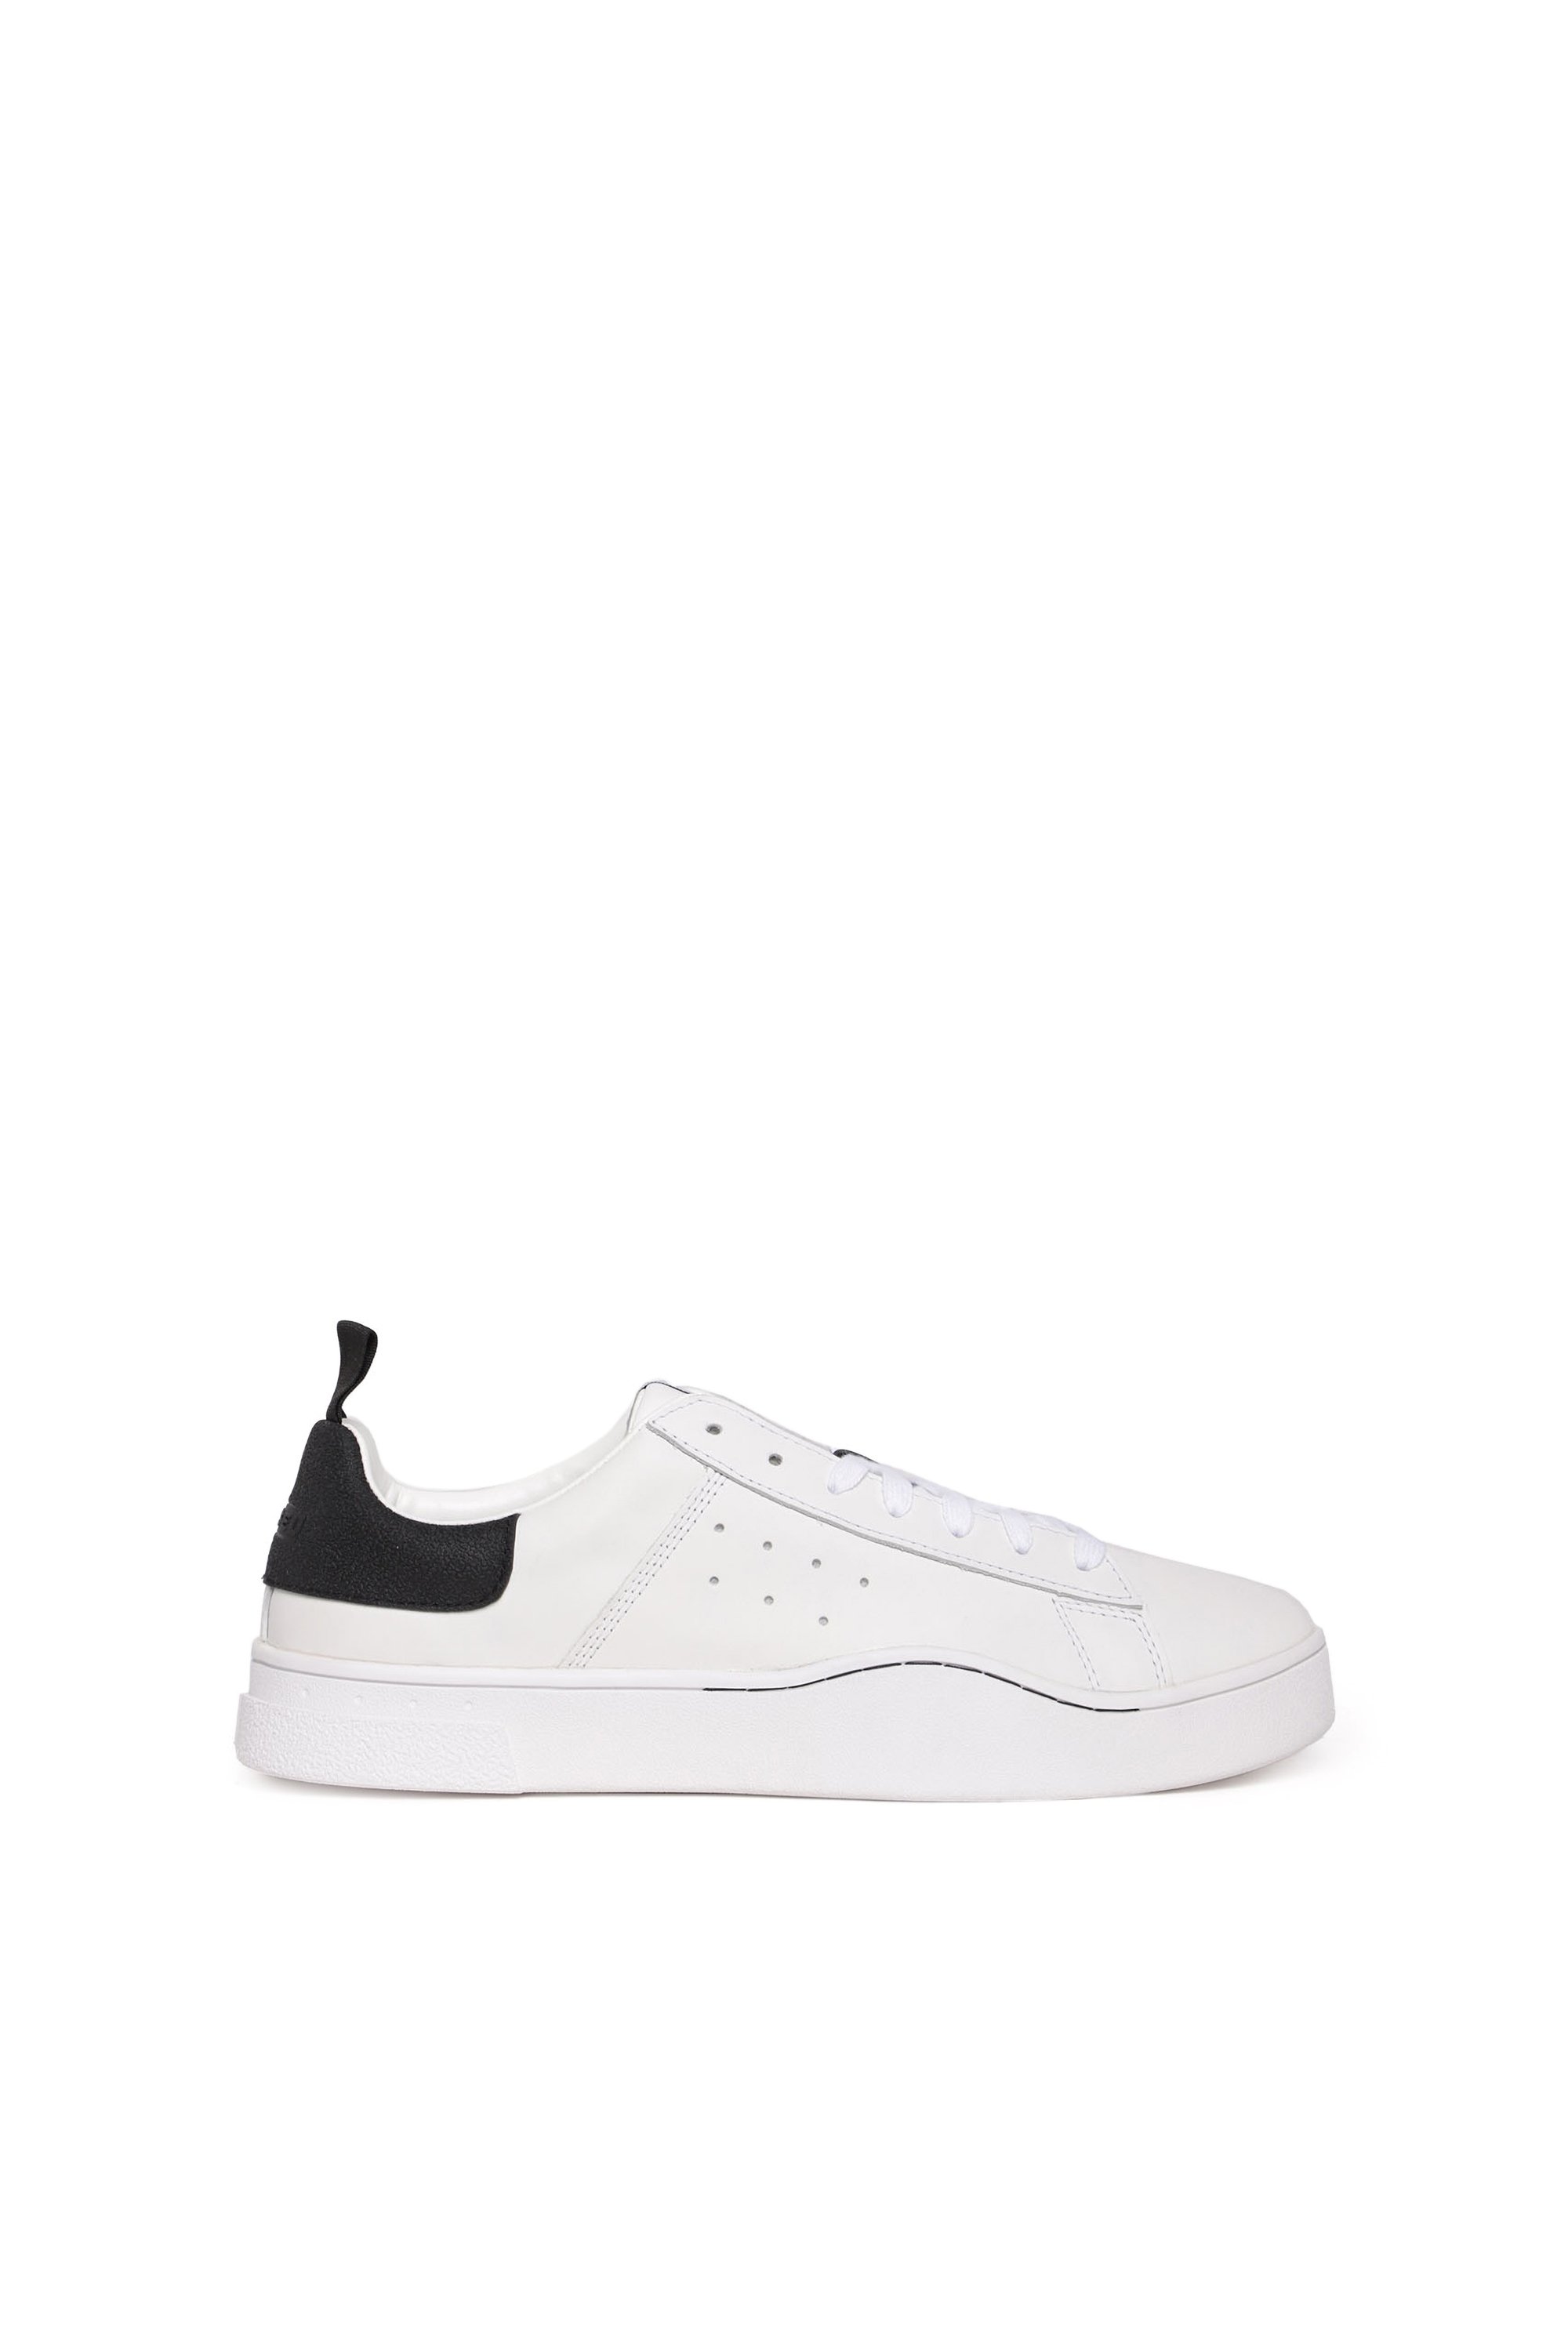 Diesel - S-CLEVER LOW, White/Black - Image 1